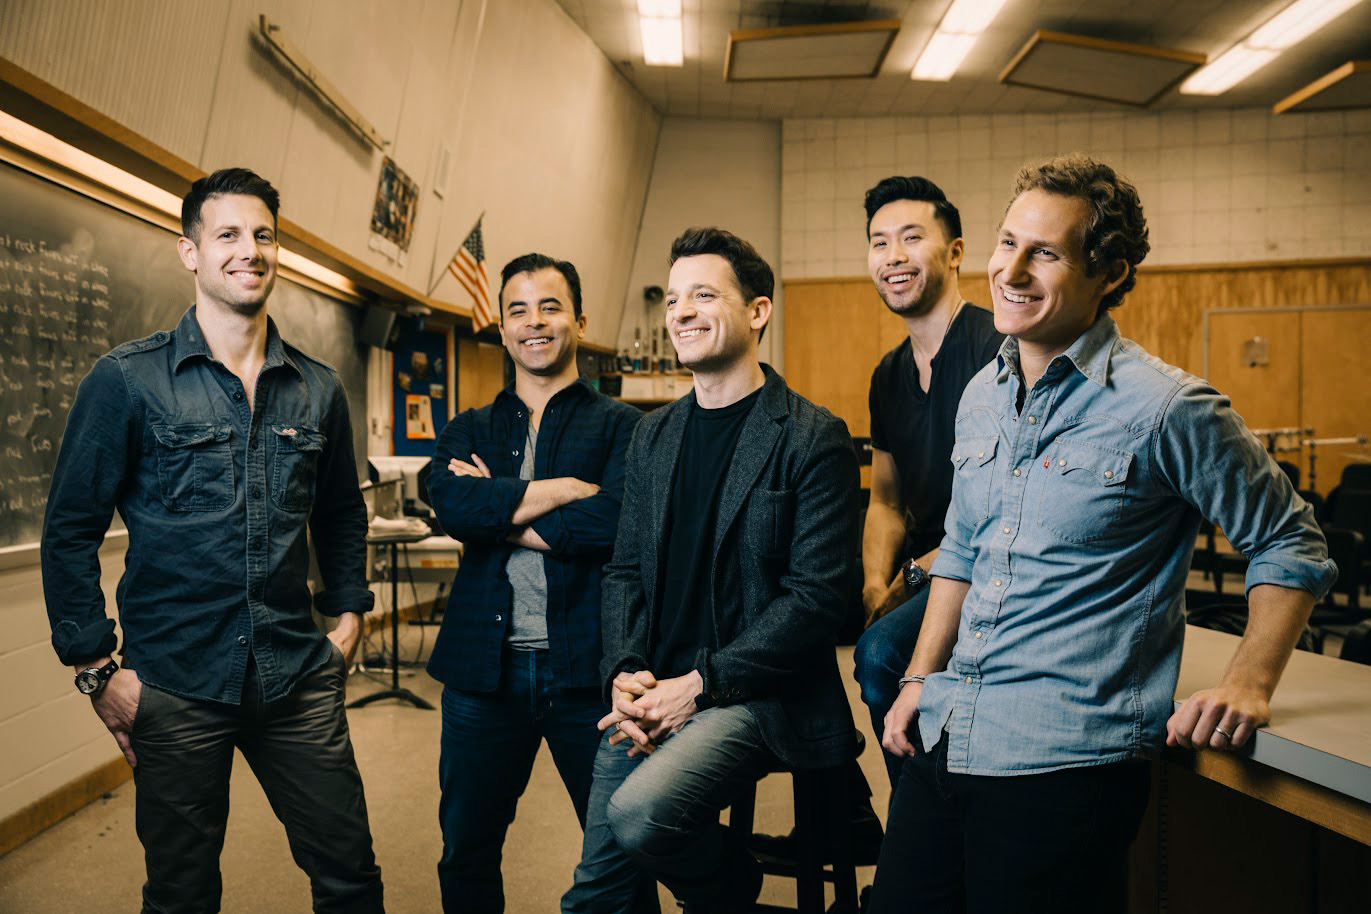 O.A.R. at Wooton High School in Maryland